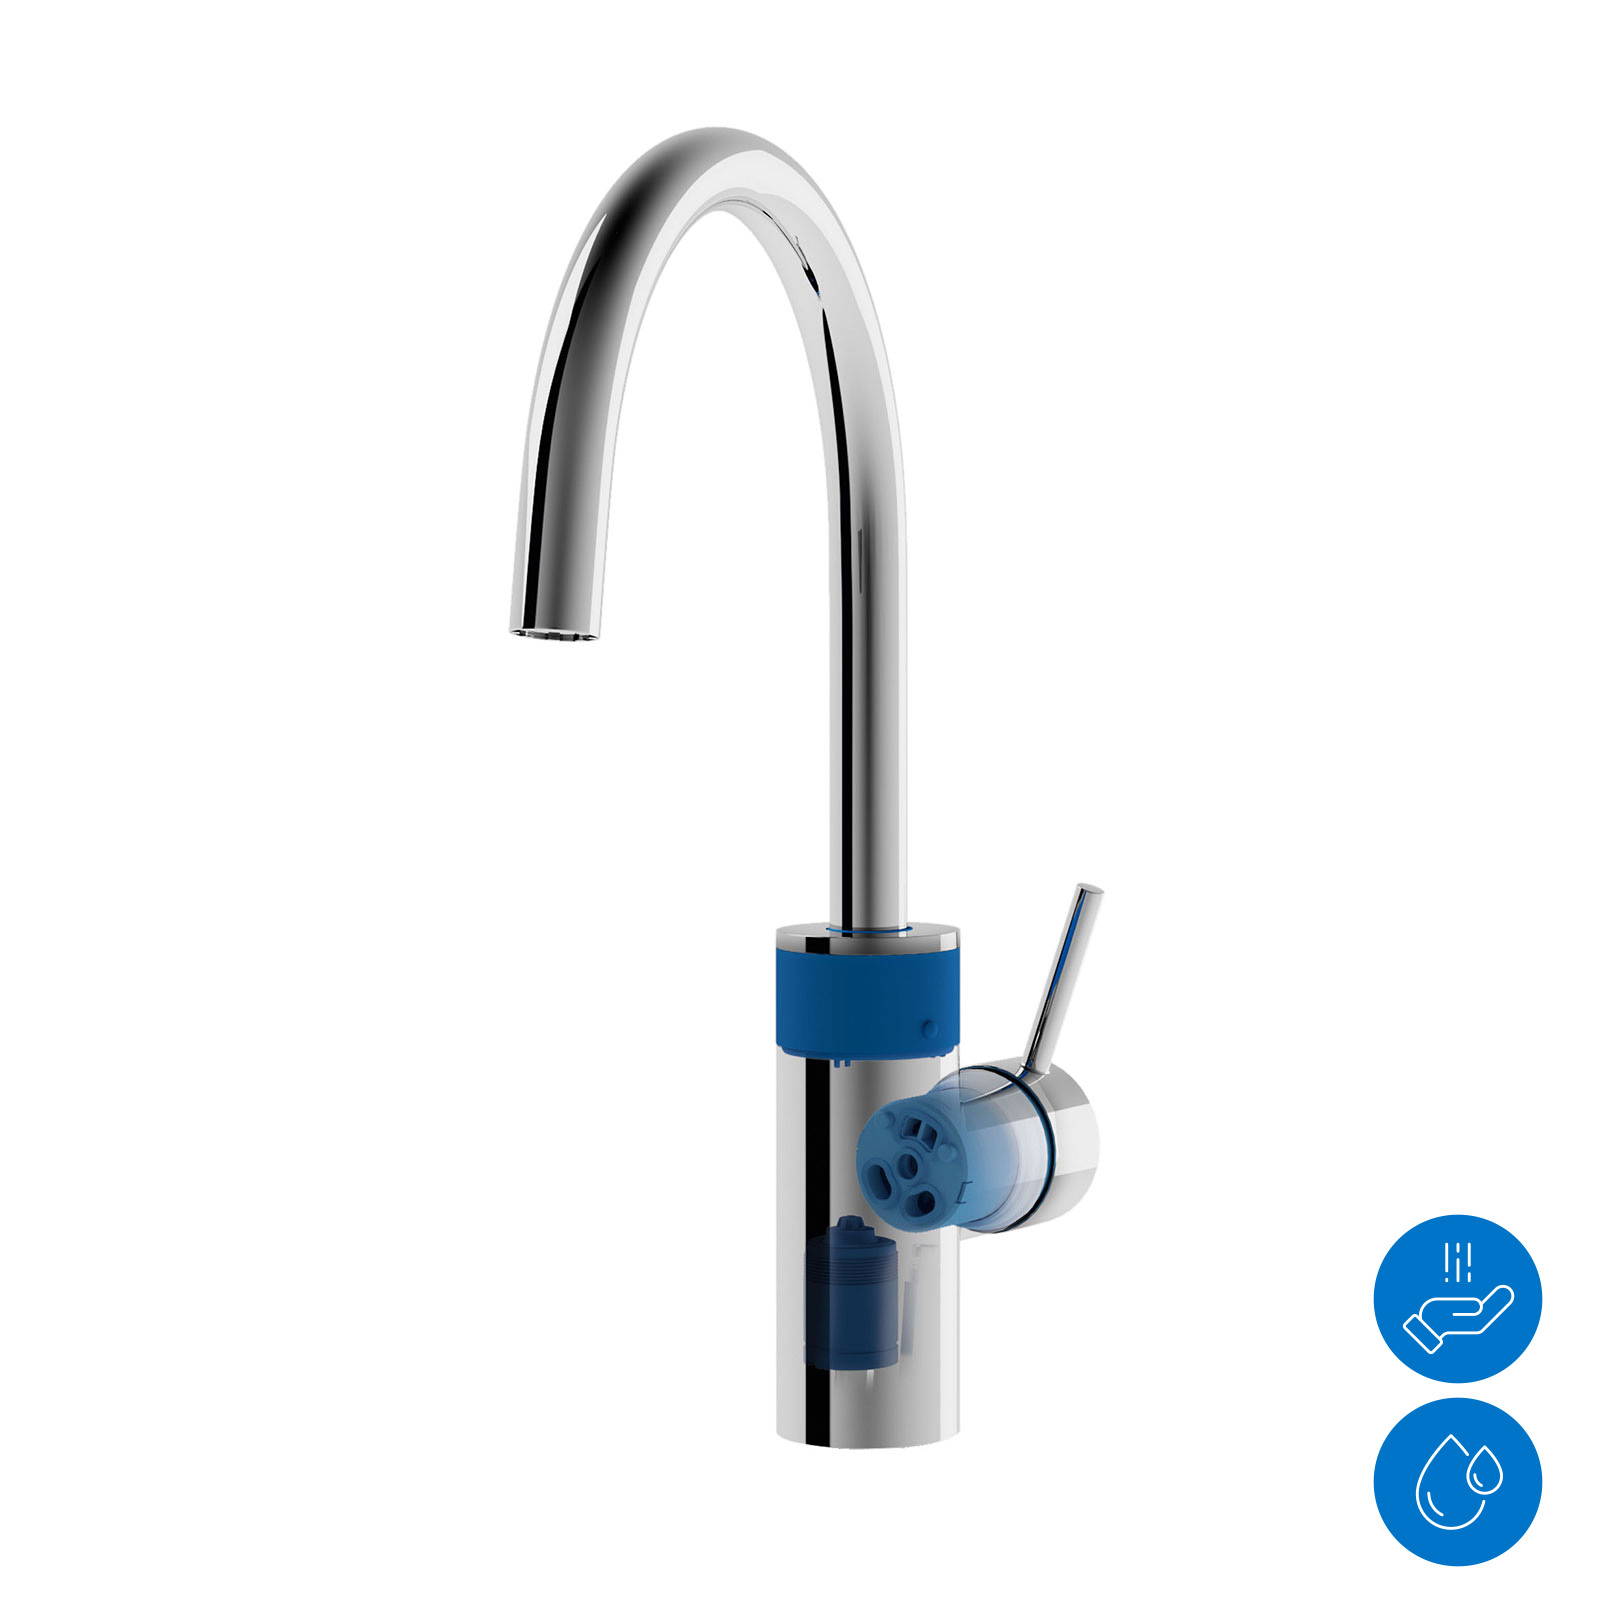 Kitchen faucet - single lever mixer and sensor combined for touch-free function